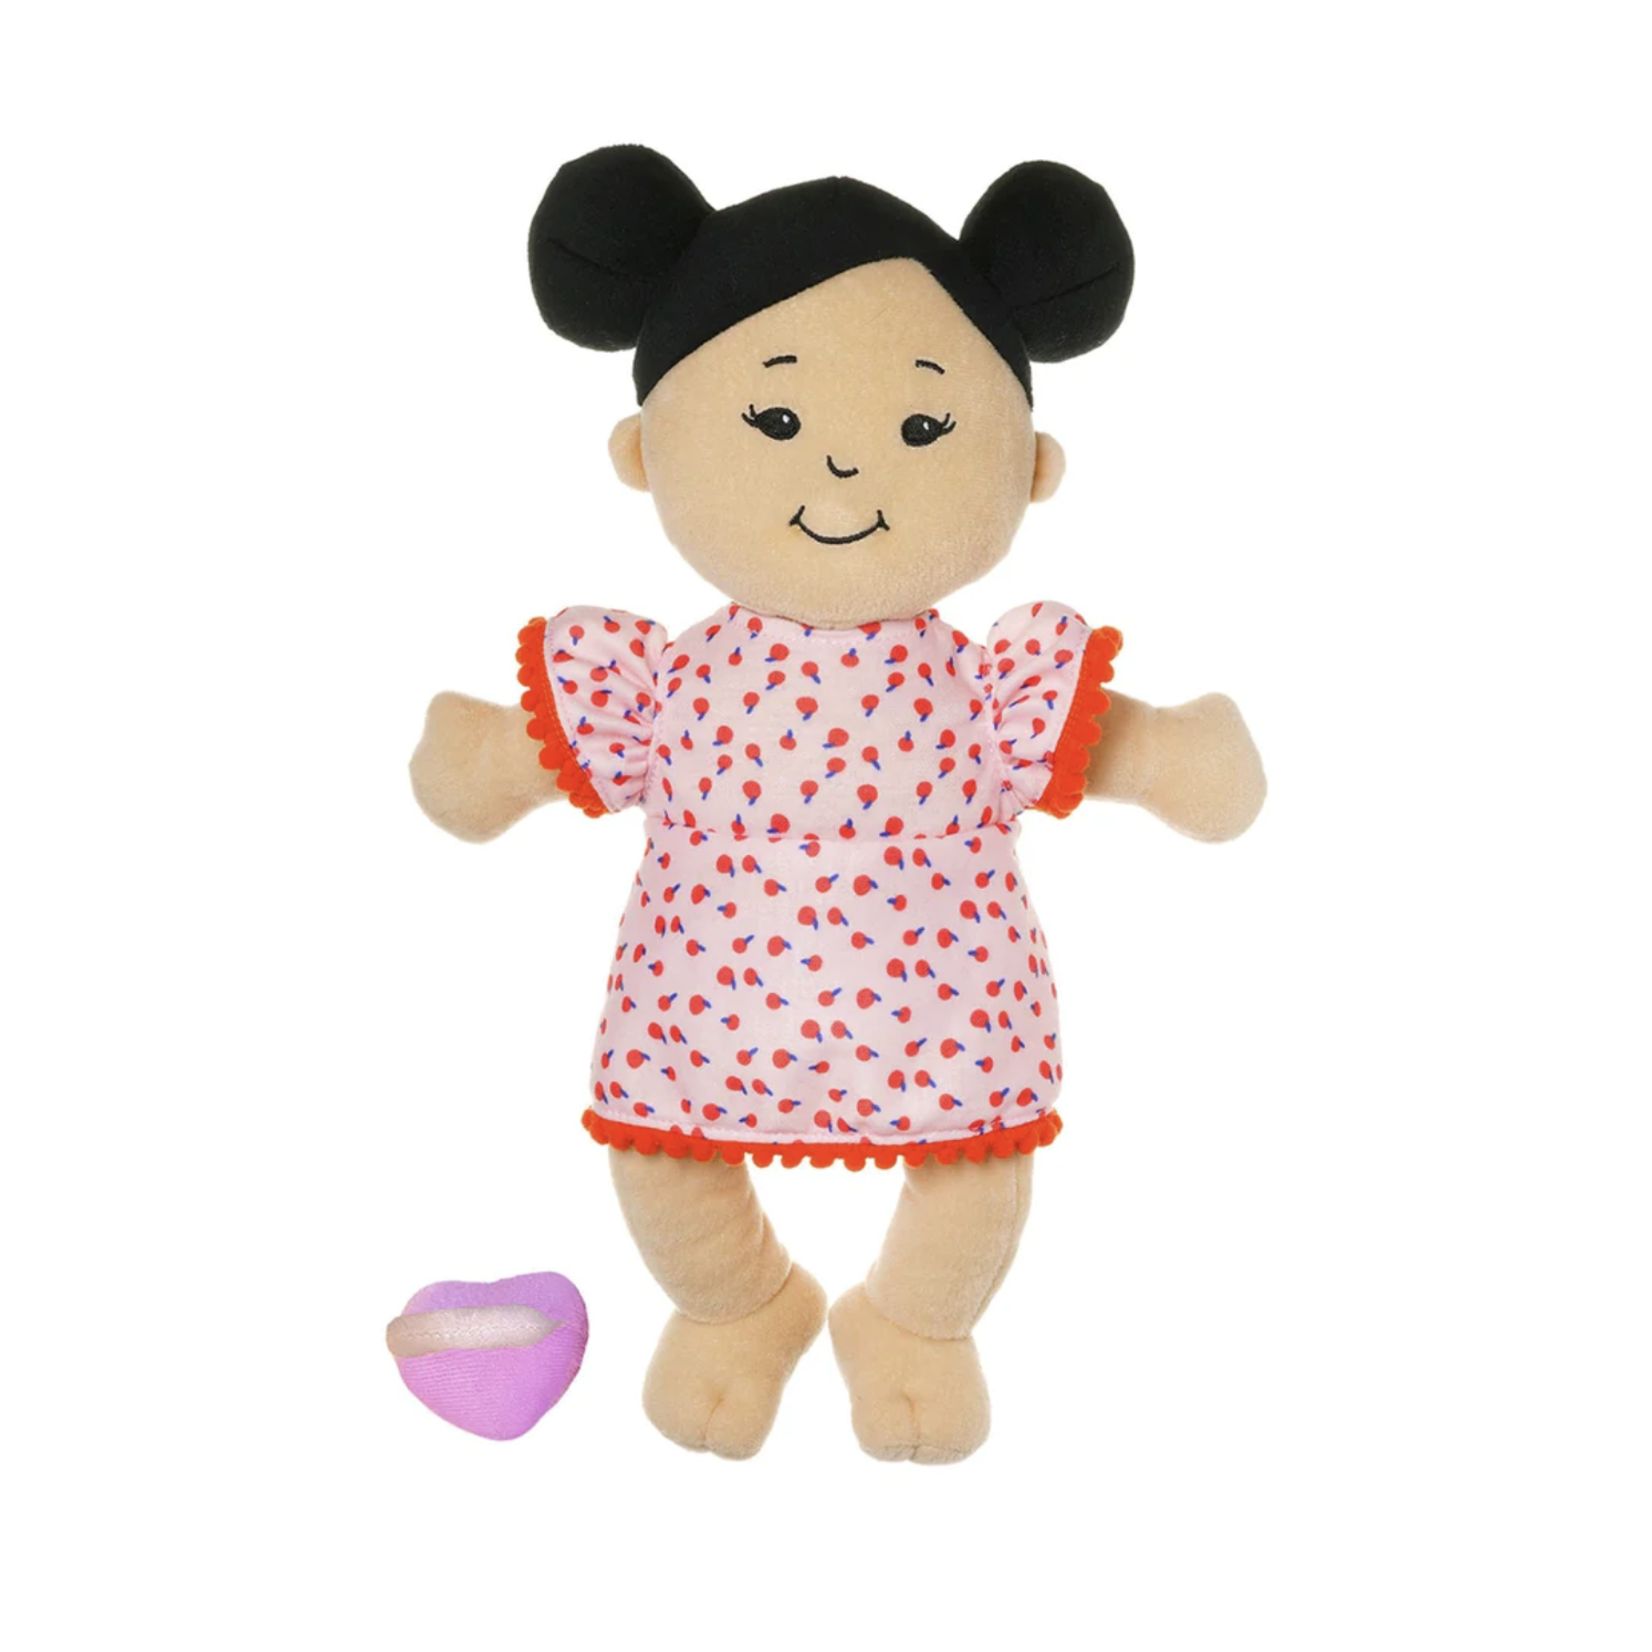 Manhattan Toy Company Wee Baby Stella Doll-Light Beige with Black Buns